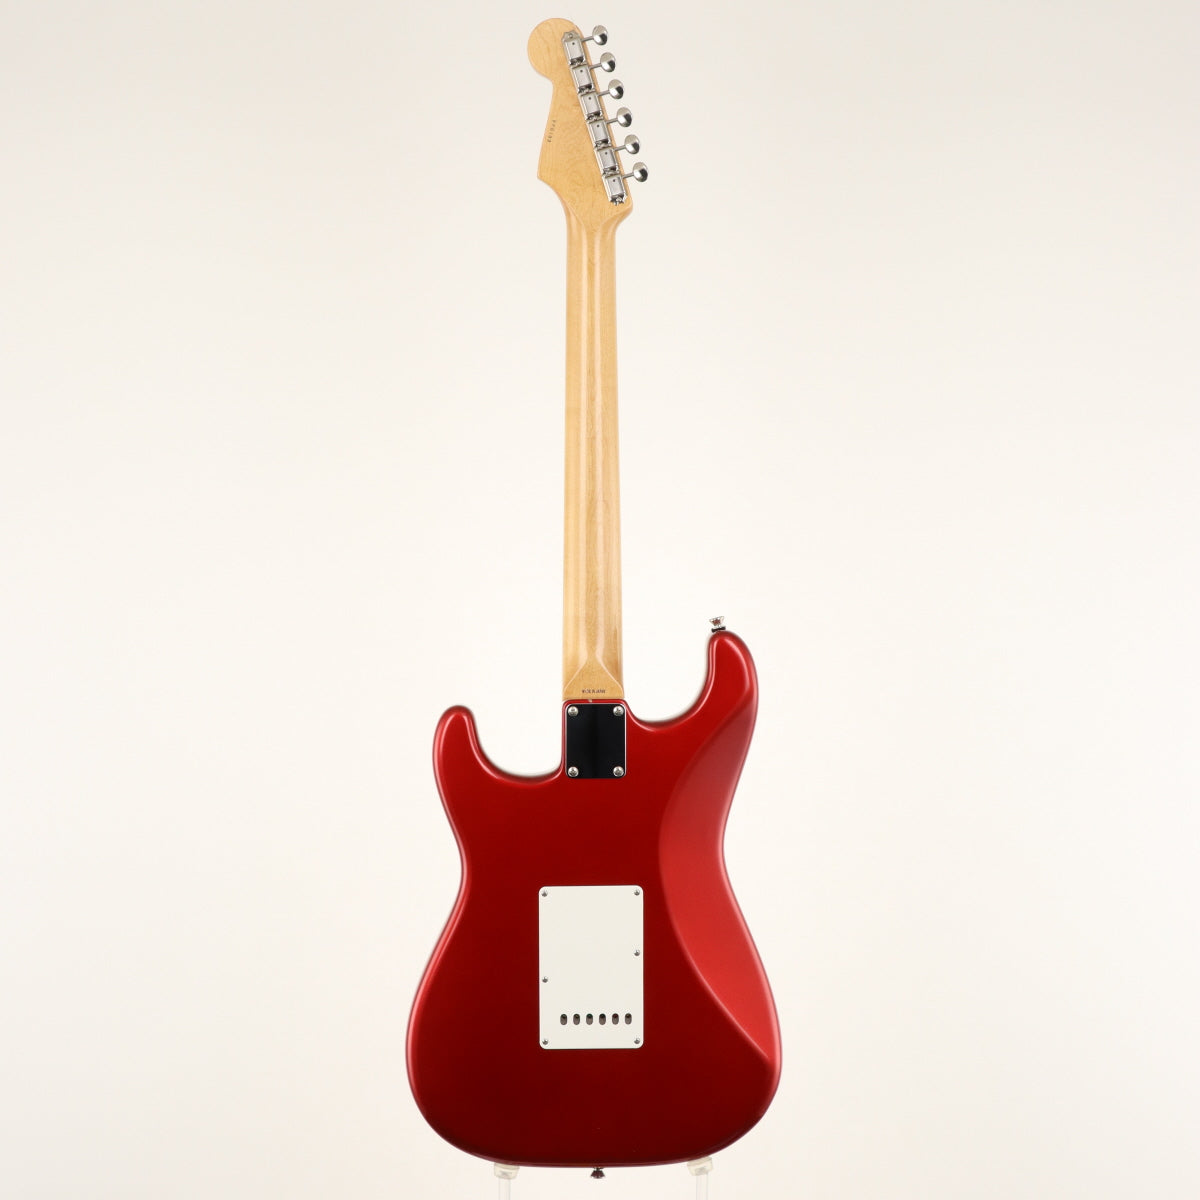 [SN DP0102] USED PGM / ST Type Candy Apple Red [11]